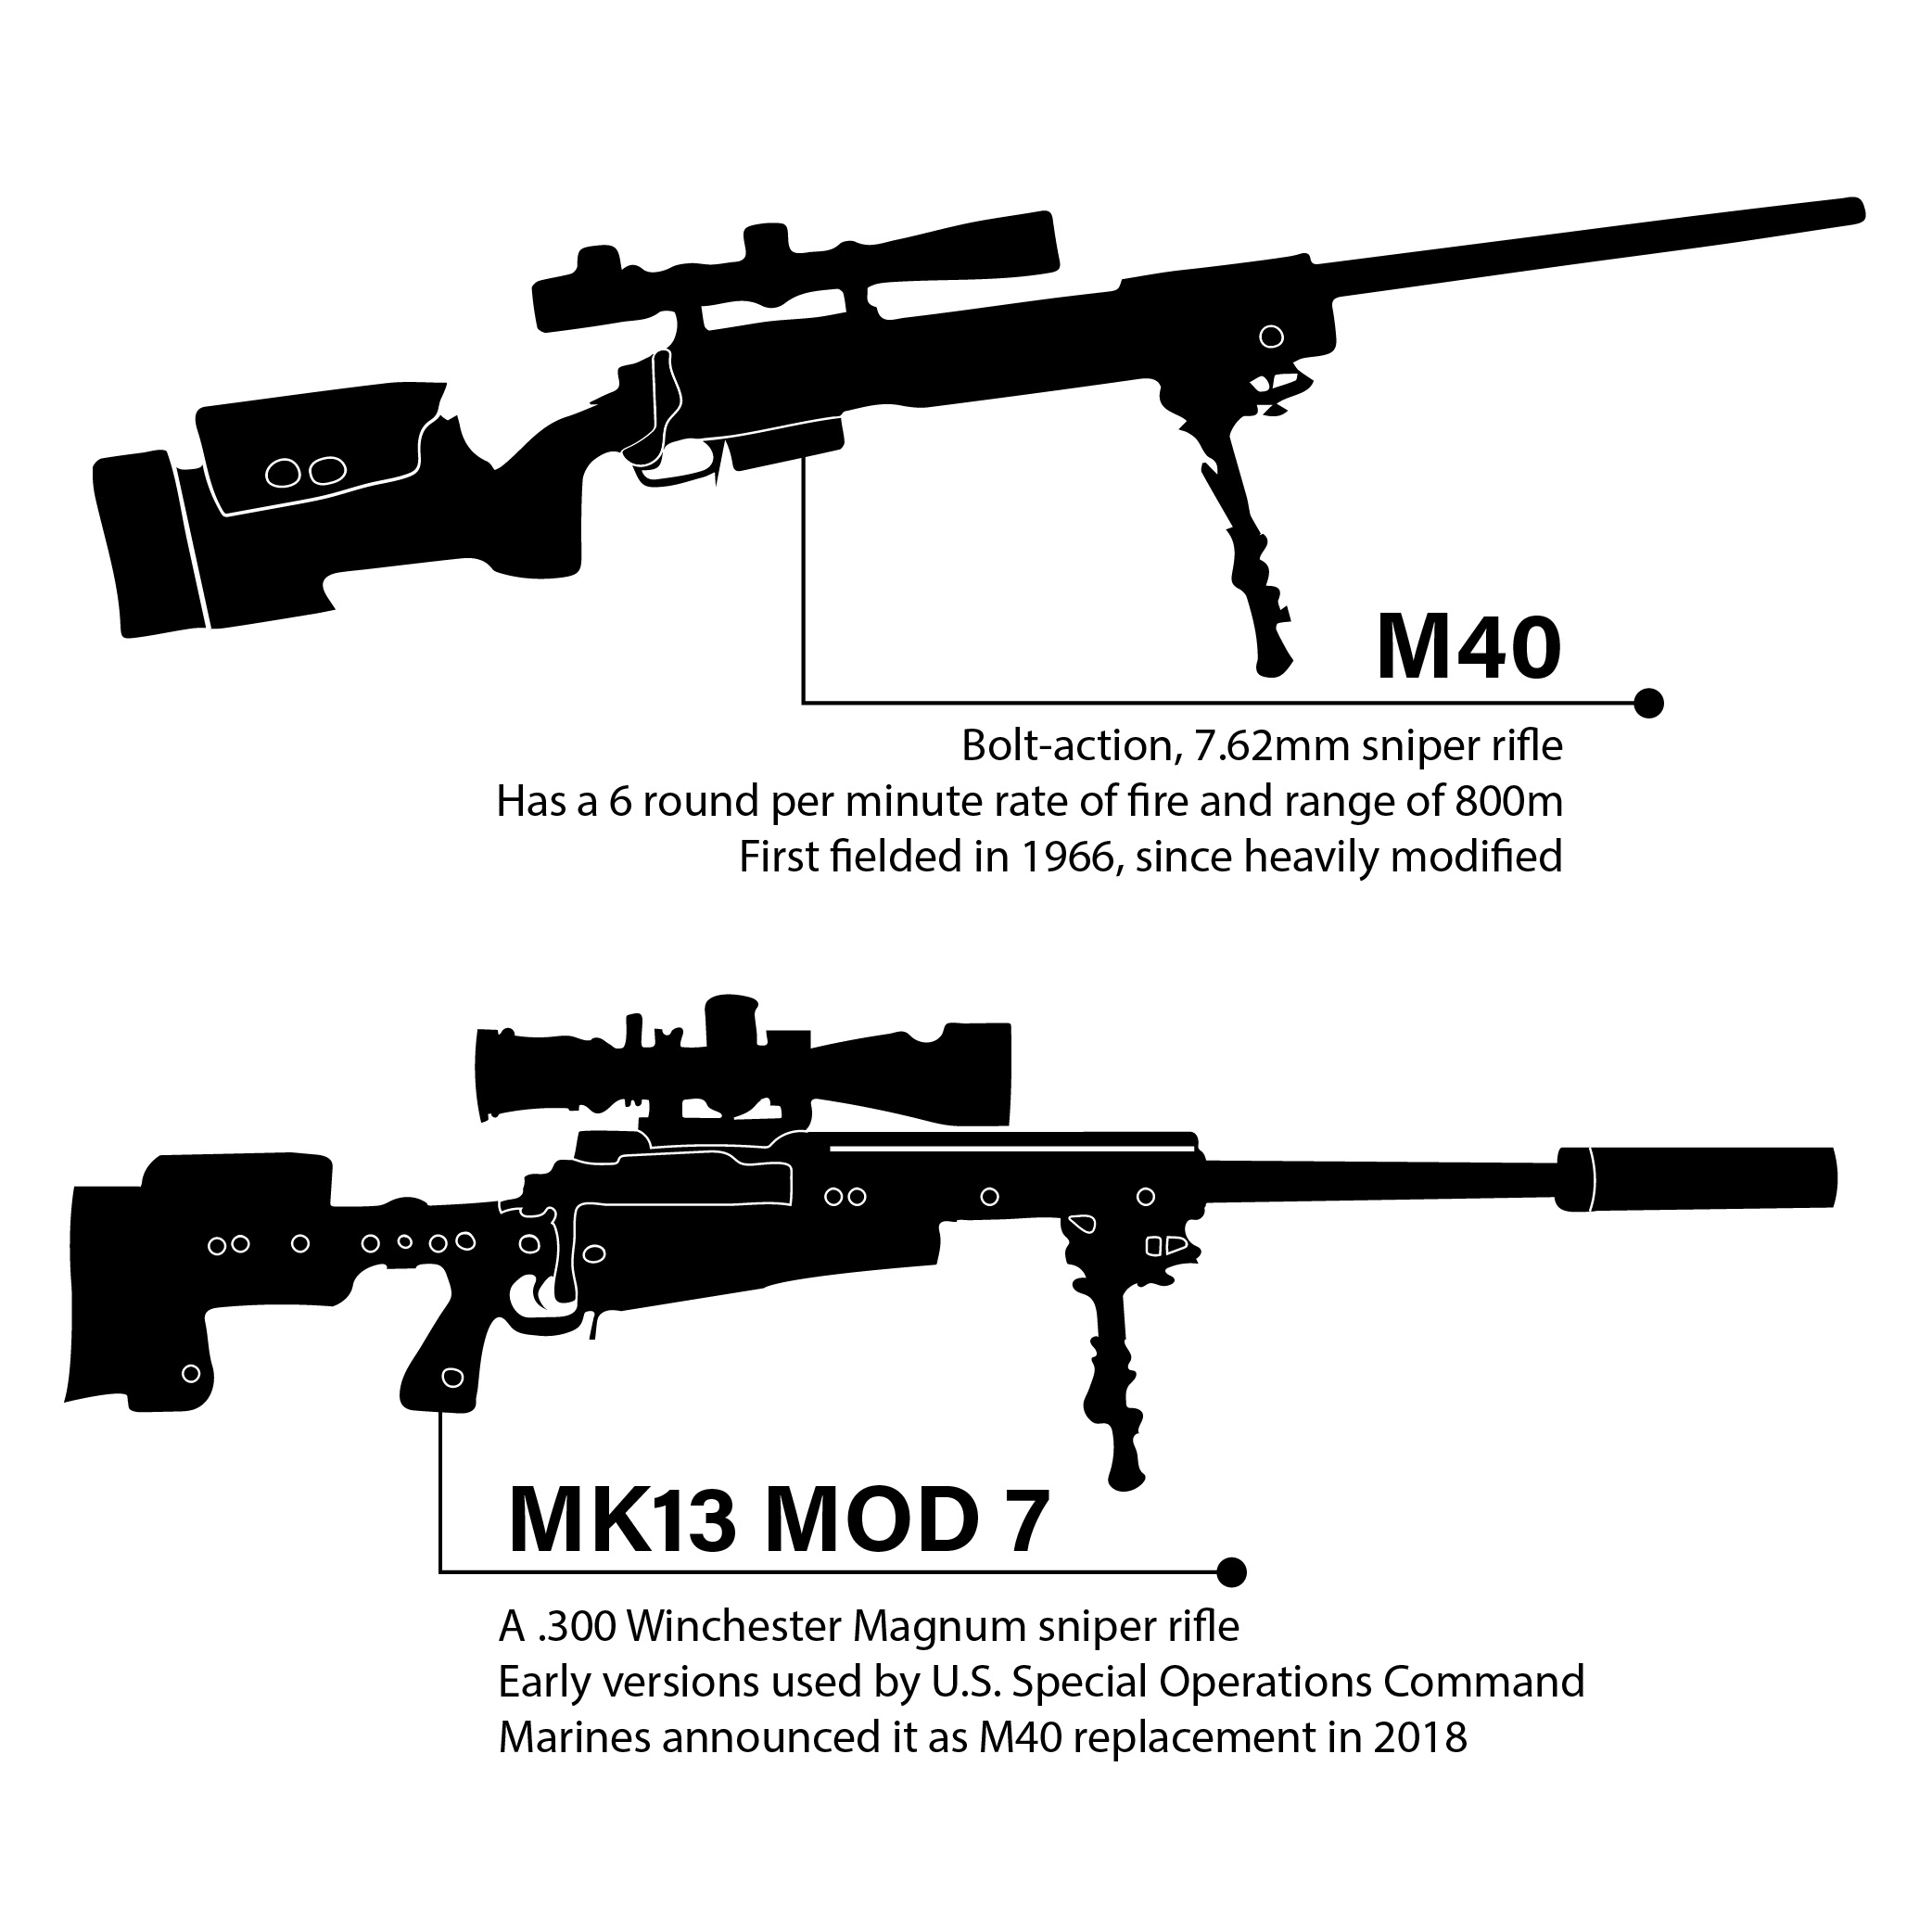 DVIDS - News - Marine Snipers get more lethal with Mk13 Sniper Rifle